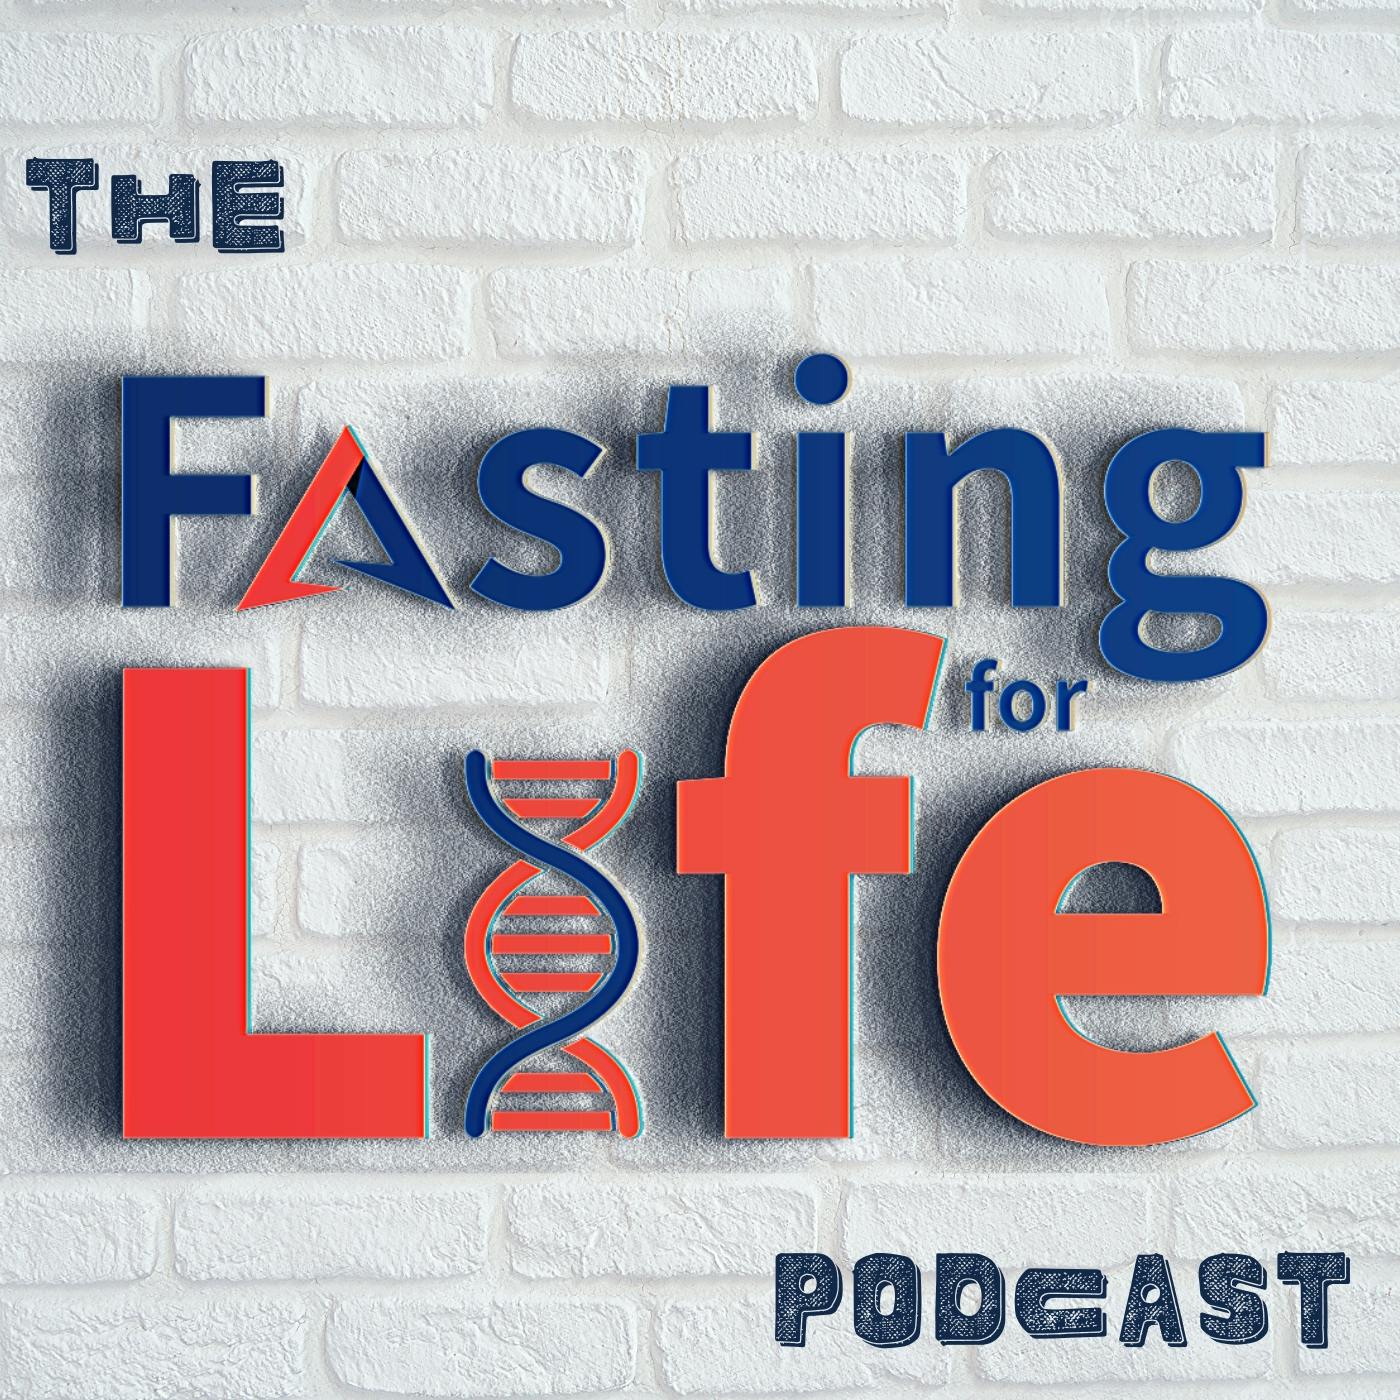 Ep. 64 - Tricks for closing your eating window before fasting | Curbing the sweet, salty, and savory cravings | Why am I really eating? | Multivitamins & supplements while fasting | Free One Meal a Da